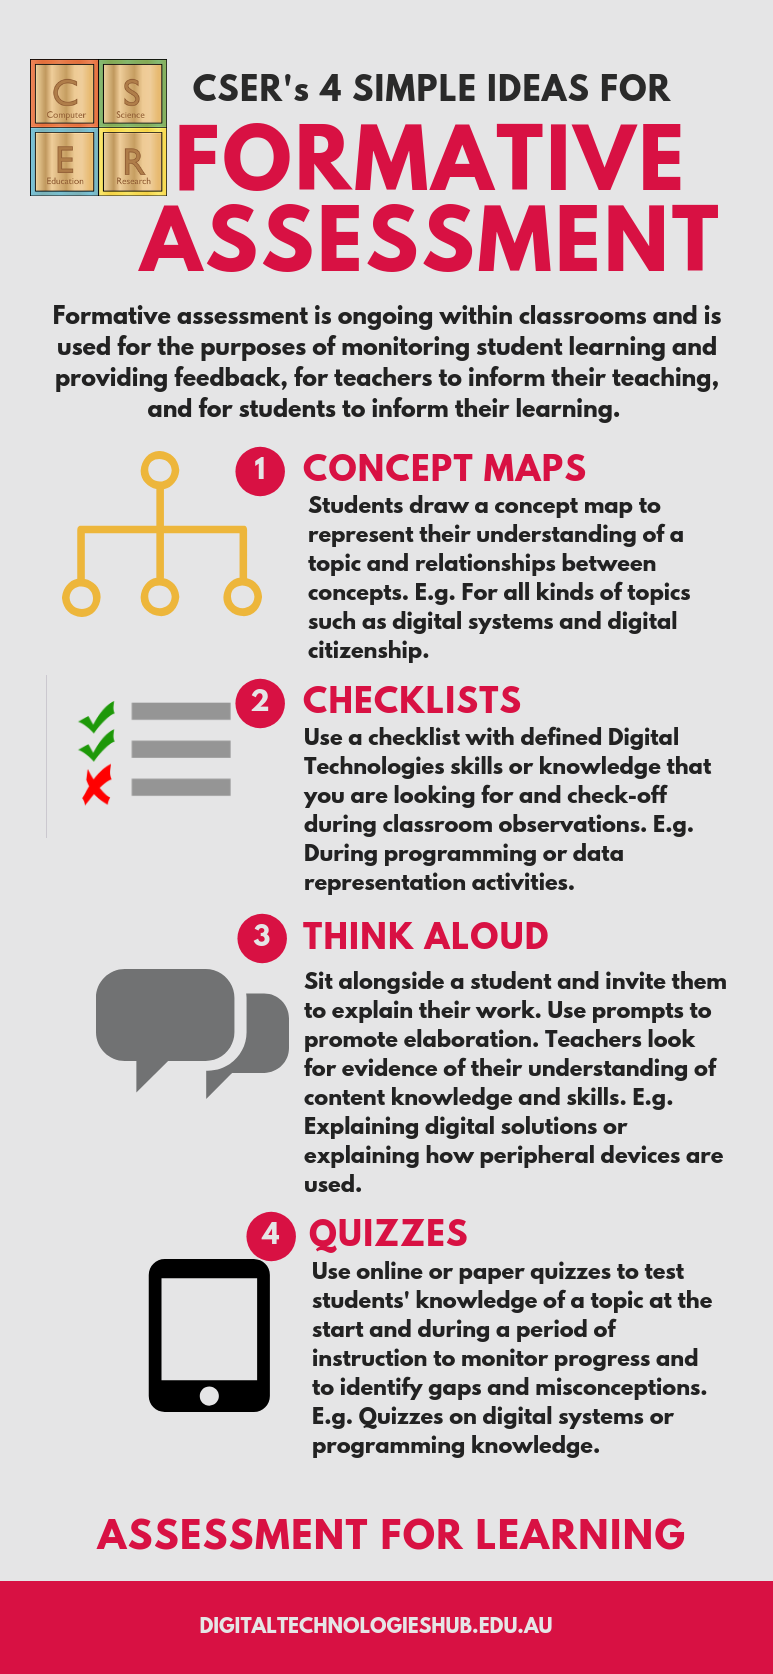 Infographic: CSER's 4 simple ideas for formative assessment. Introduction: Formative assessment is ongoing within classrooms and is used for the purposes of monitoring student learning and providing feedback, for teachers to inform their teaching, and for students to inform their learning. Step 1: Concept maps. Students draw a concept map to represent their understanding of a topic and relationships between concepts. For example, for all kinds of topics such as digital systems and digital citizenship. Step 2: Checklists. Use a checklist with defined Digital Technologies skills or knowledge that you are looking for and check-off during classroom observations. For example, during programming or data representation activities. Step 3: Think aloud. Sit alongside a student and invite them to explain their work. Use prompts to promote elaboration. Teachers look for evidence of their understanding of content knowledge and skill. For example, explaining digital solutions or explaining how peripheral devices are used.  Step 4: Quizzes. Use online or paper quizzes to test students' knowledge of a topic at the start and during a period of instruction to monitor progress and identify gaps and misconceptions. For example, quizzes on digital systems or programming knowledge.